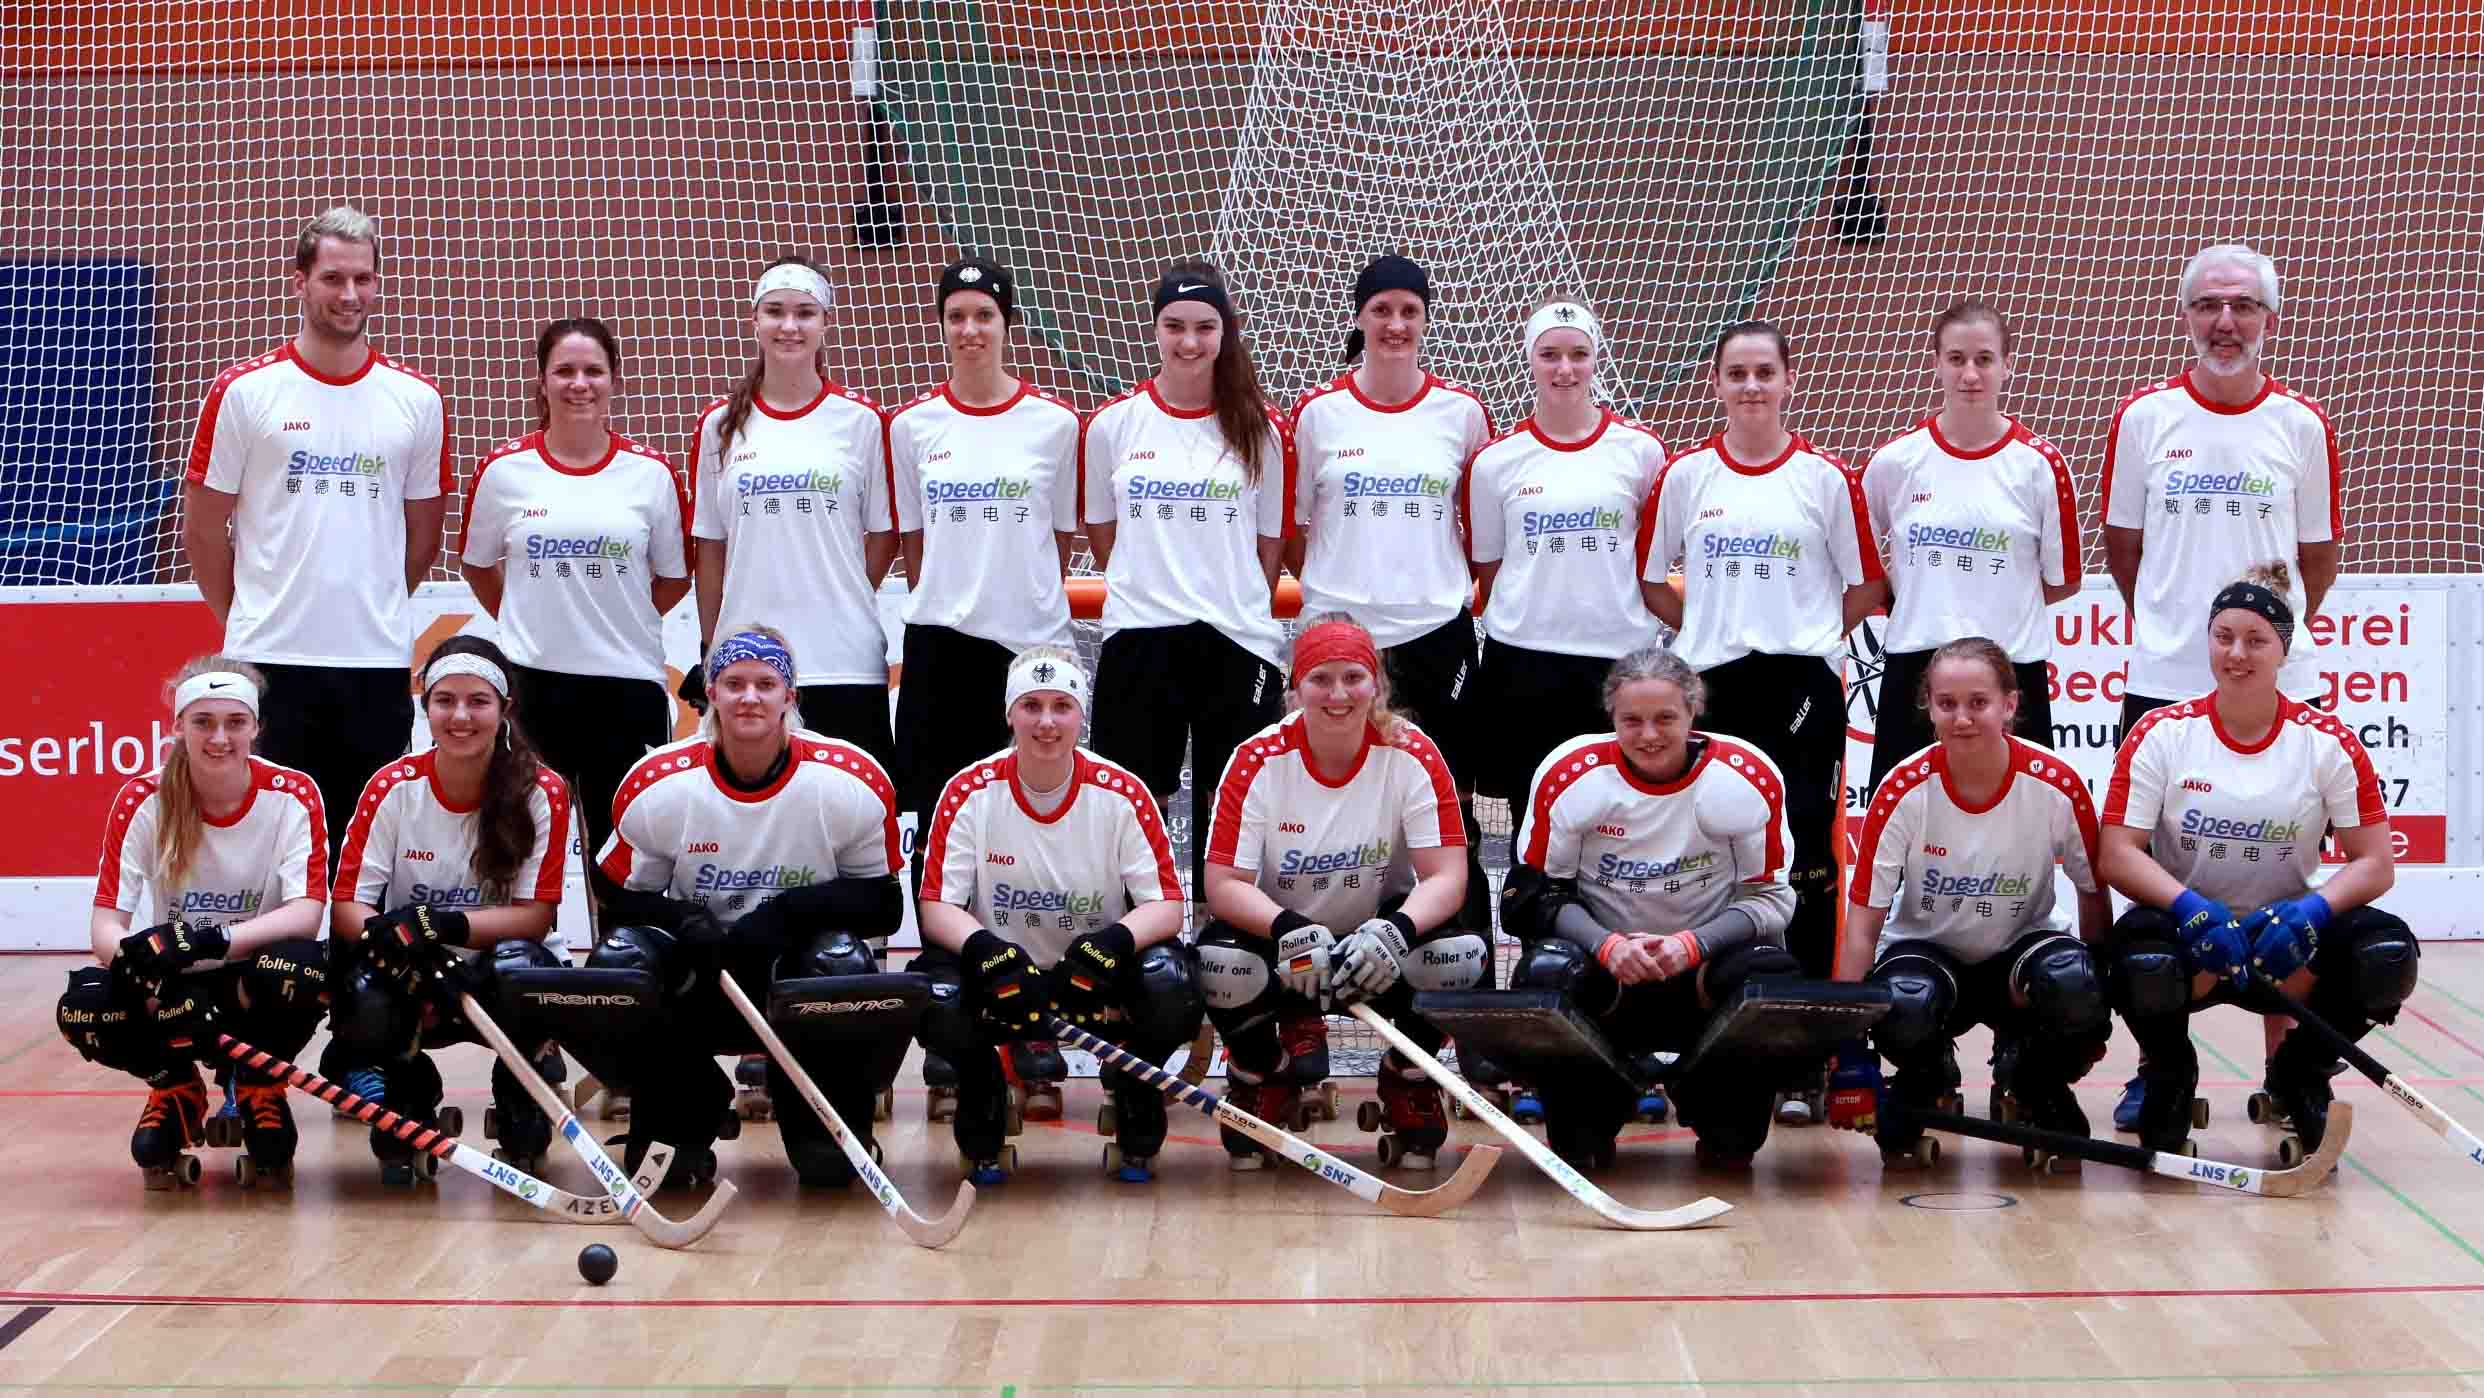 Our Sponsorship Contract To The German Women’s National Roller Hockey Team Extended